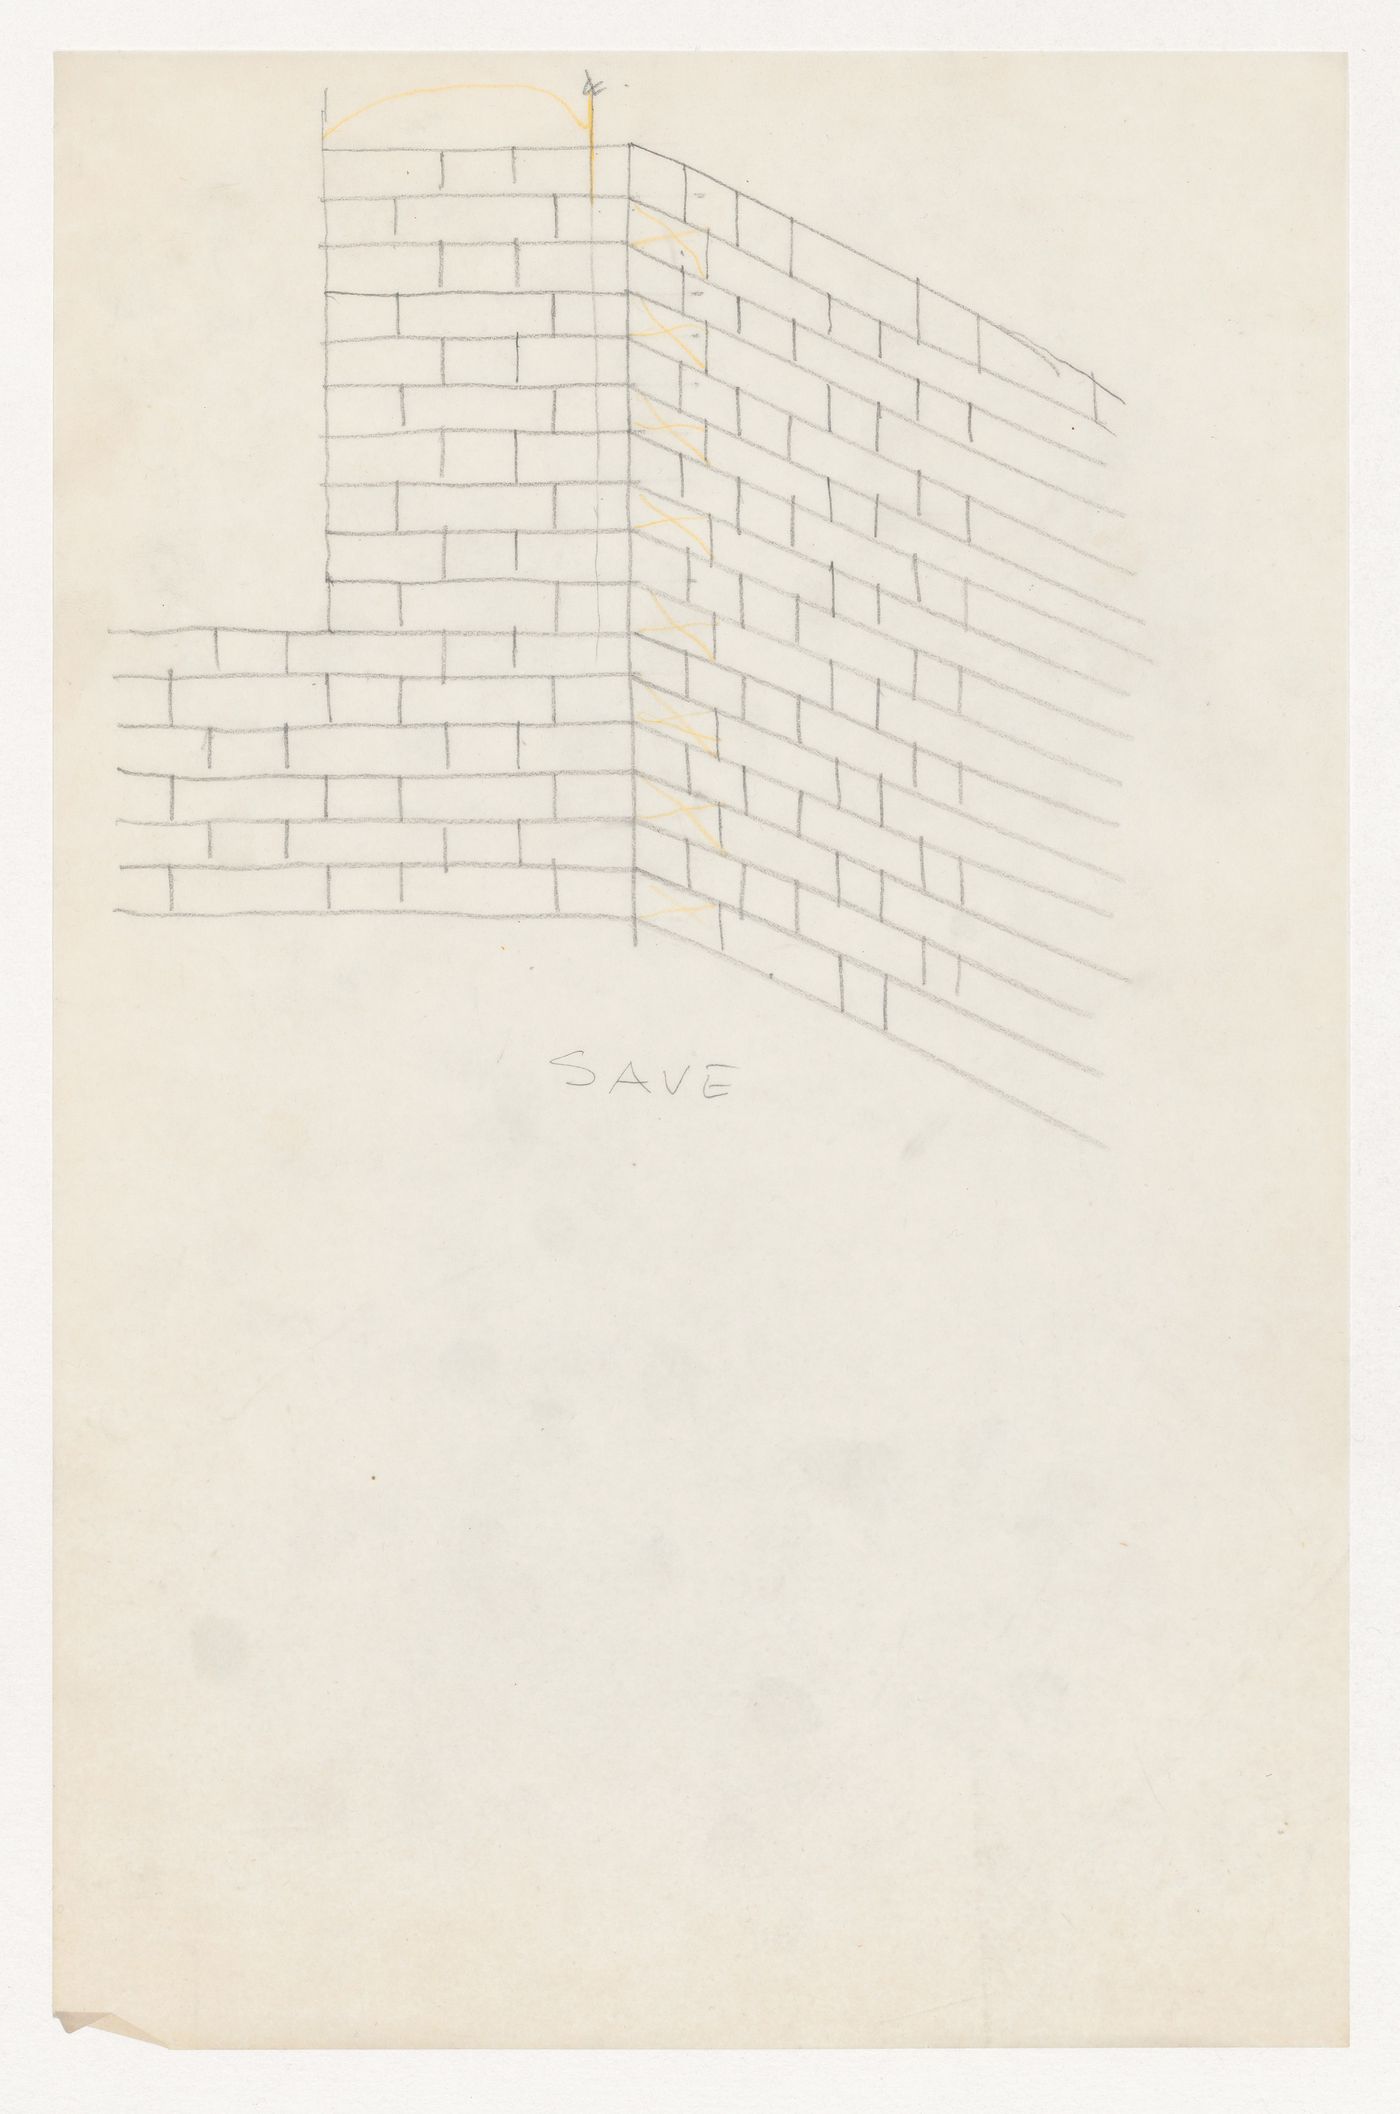 Perspective sketch for brick coursing at a corner for the Metallurgy Building, Illinois Institute of Technology, Chicago